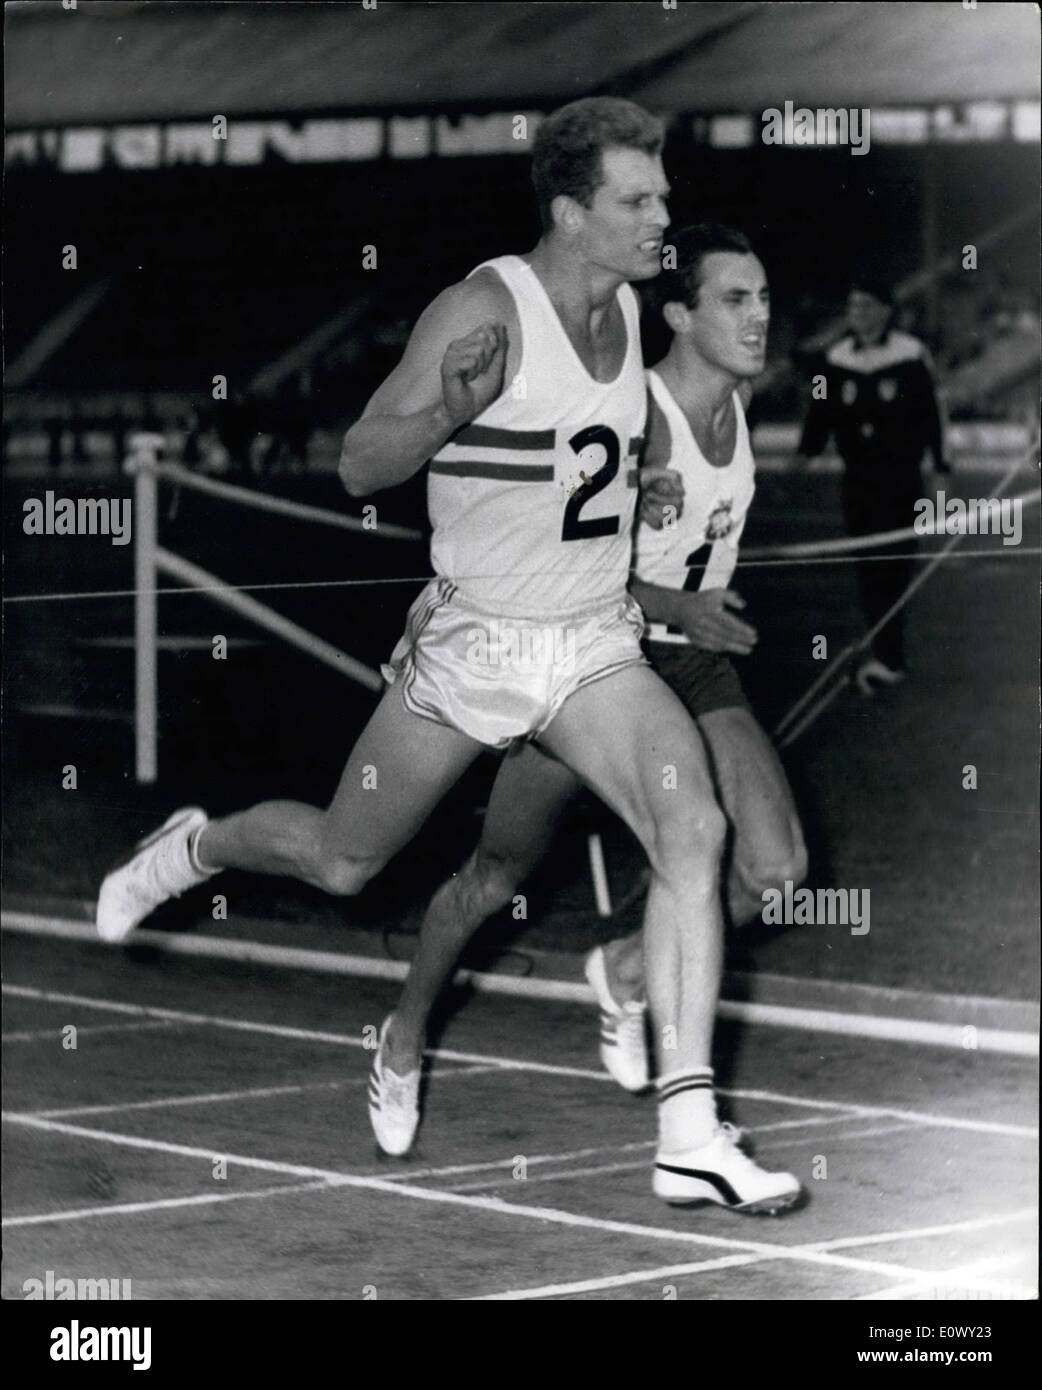 Aug. 08, 1964 - Robbie Brightwell Wins 400 Meter Event.. Highlight of the Great Britain versus Poland International Athletic and Field Match at White City-London last night was the 400 meters event.Winner was Britain's Robbie Brightwell (No.2) in 46.2 sec-just beating Poland's Andrezej Badenski No.1 in 46.2 and Britain's Tim Graham third in 47.3. Stock Photo